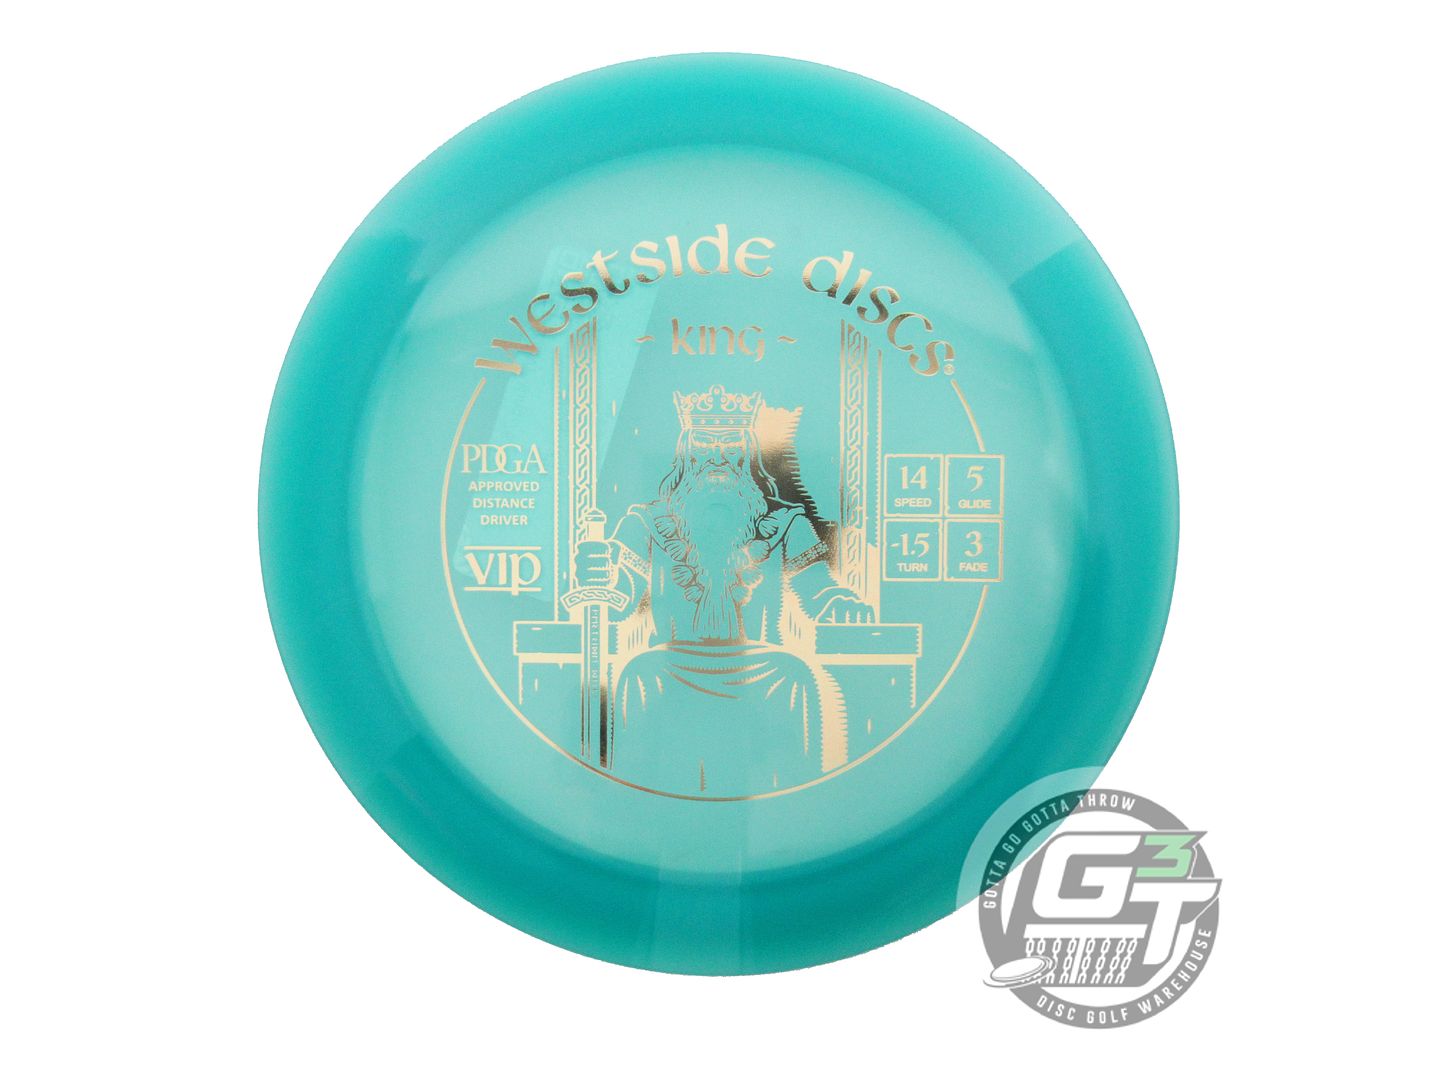 Westside VIP King Distance Driver Golf Disc (Individually Listed)